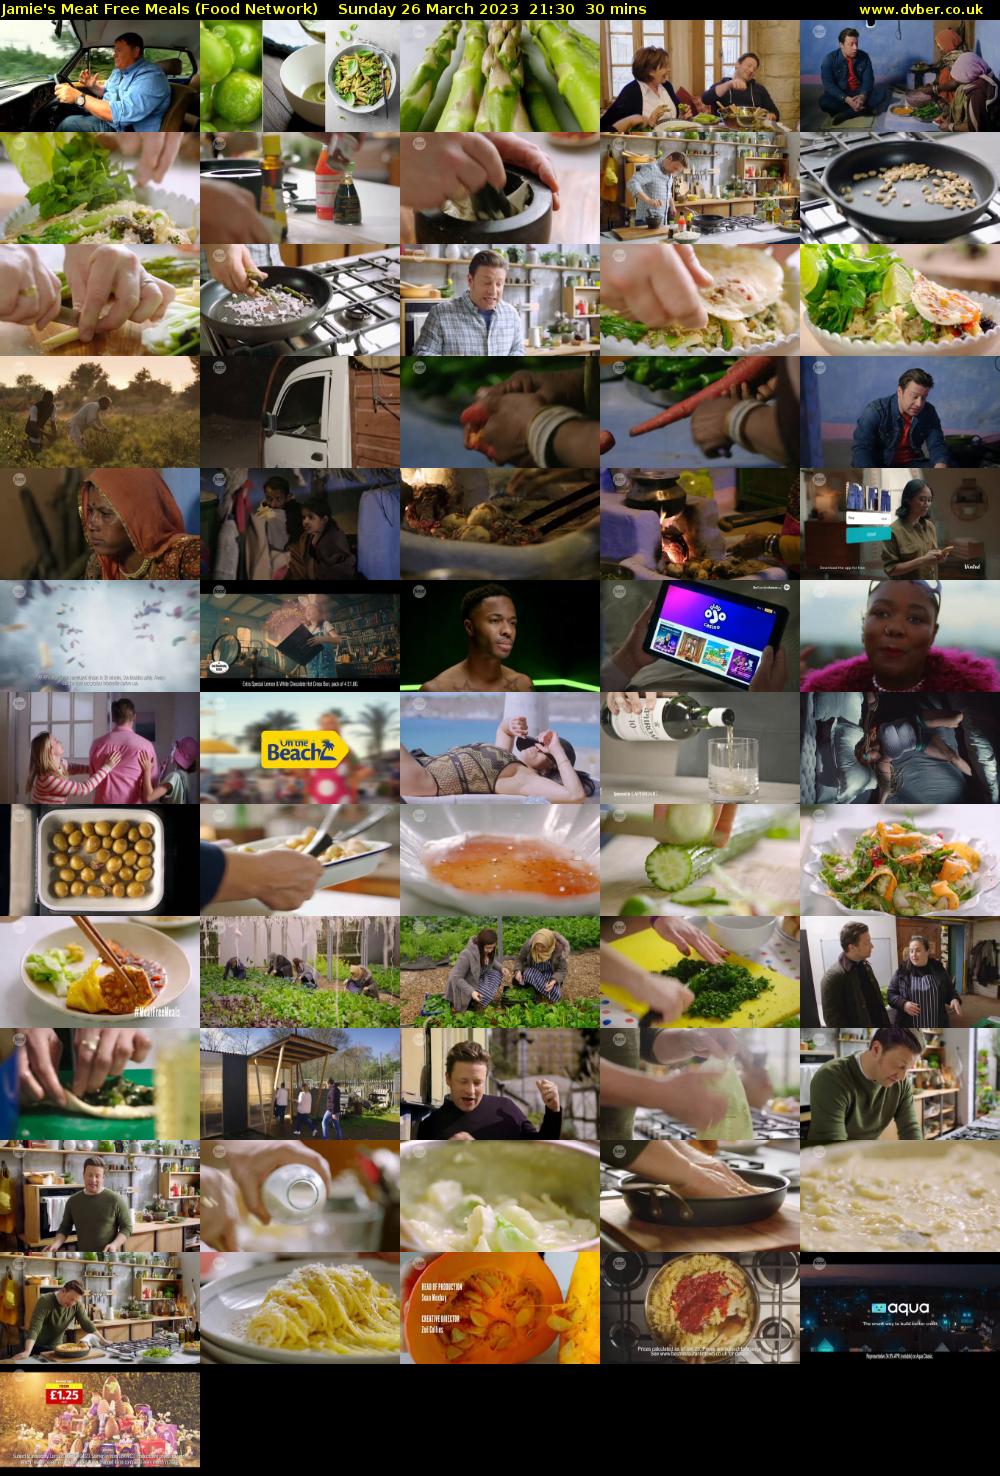 Jamie's Meat Free Meals (Food Network) Sunday 26 March 2023 21:30 - 22:00